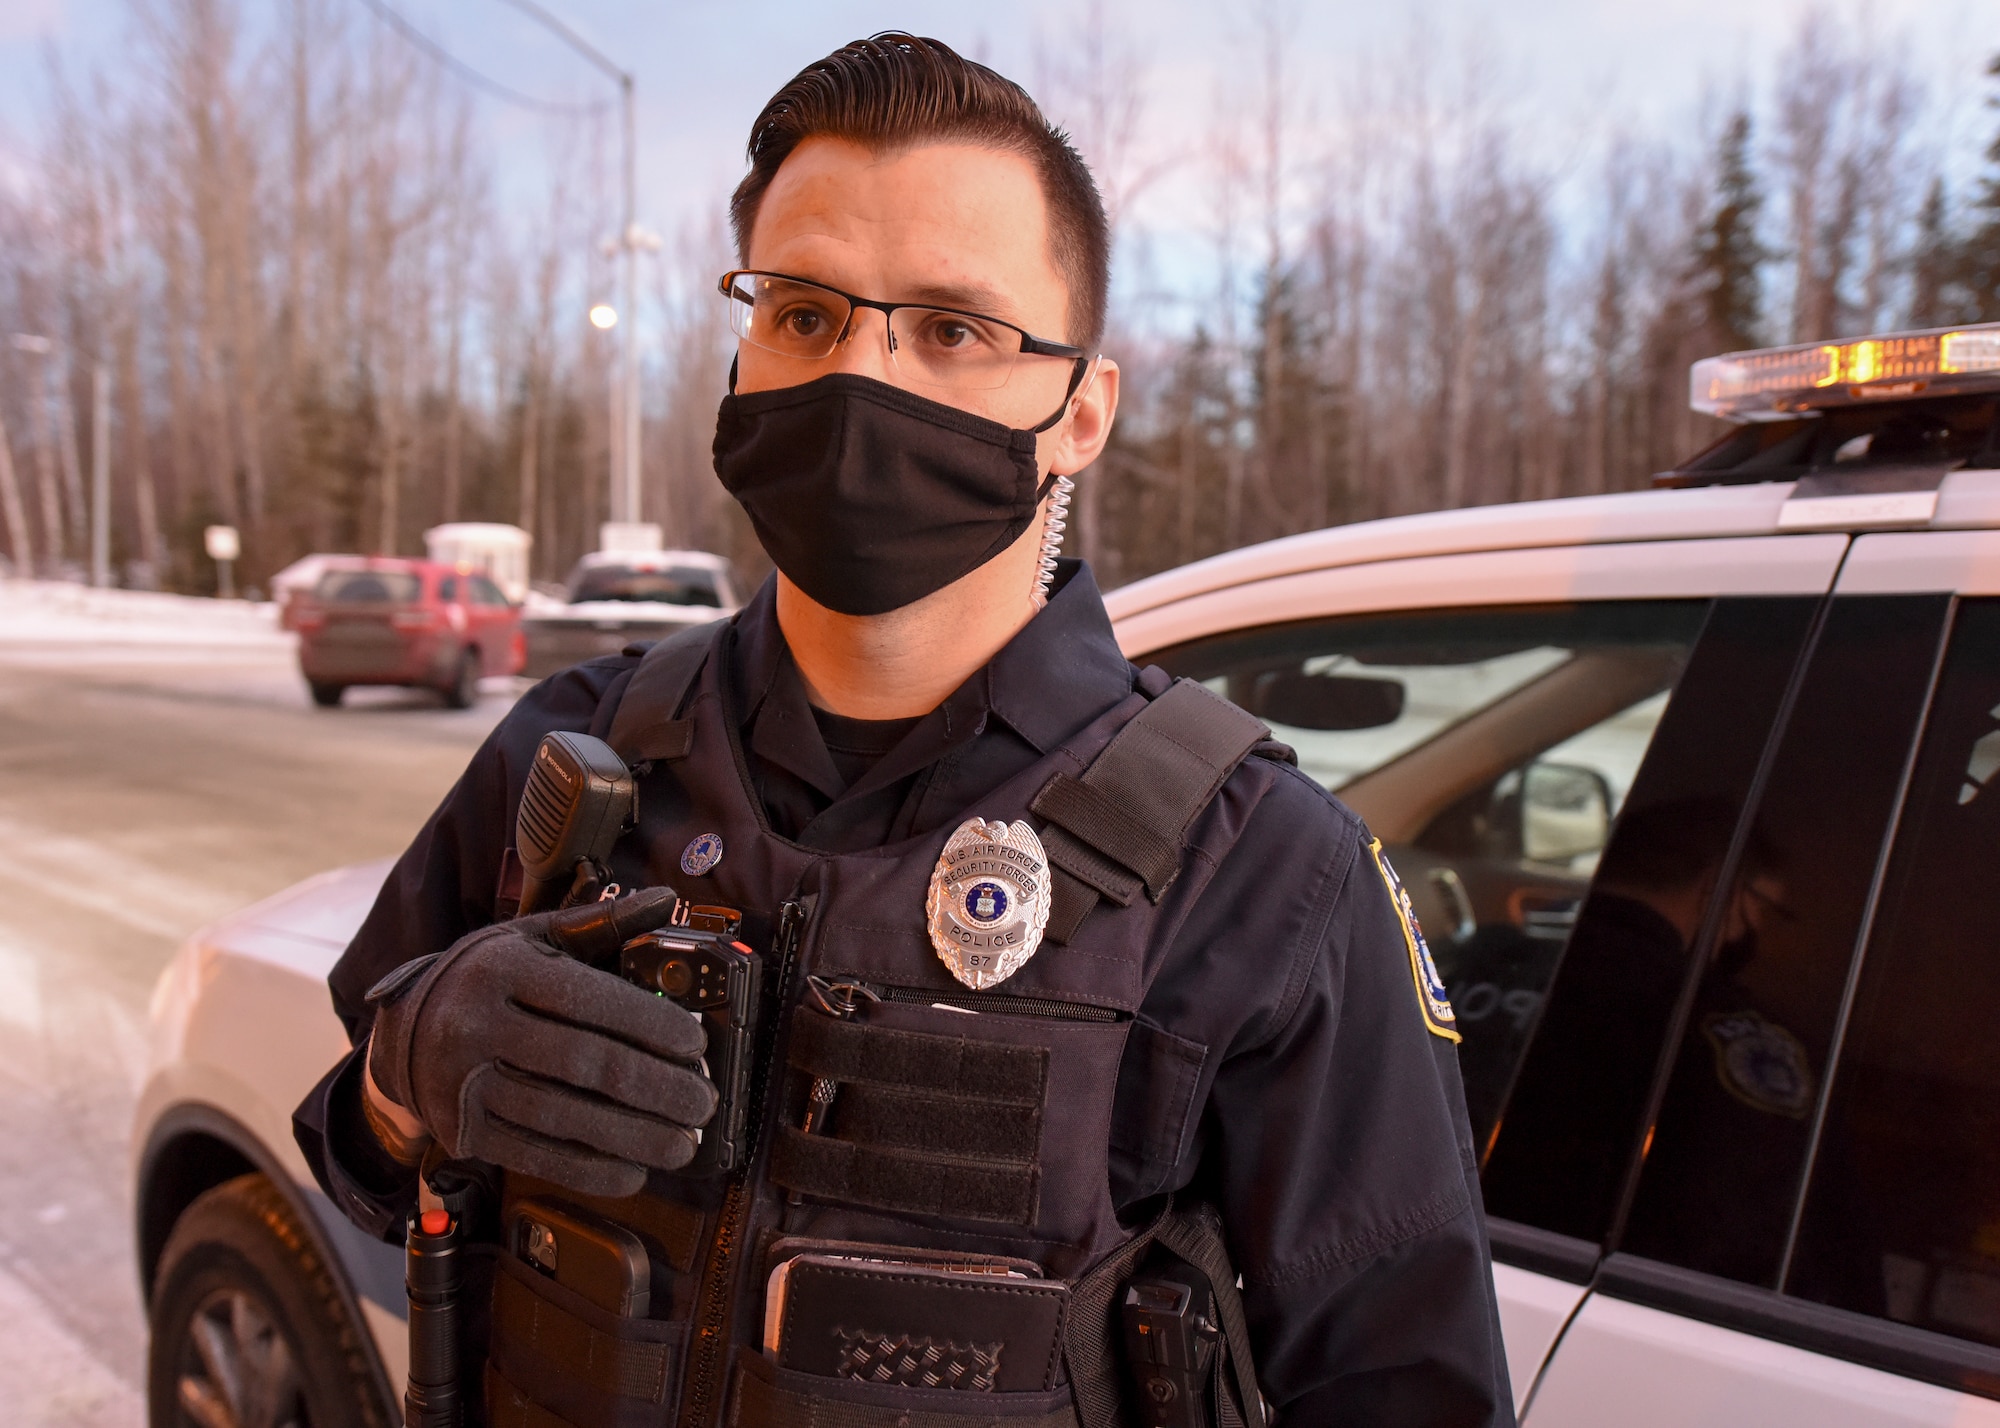 Department of Defense Police Officer Richard Martinez, a patrol officer with the 673d Security Forces Squadron turns on a new body camera during a routine stop Jan. 8, 2021, at Joint Base Elmendorf-Richardson, Alaska. The 673d SFS has begun integrating 60 new, high-tech body cameras into daily operations after the adaptable technology reached a point of not only being a reliable safety and training instrument, but a multifunctional accountability tool serving all. (U.S. Air Force photo by Senior Airman Crystal A. Jenkins)